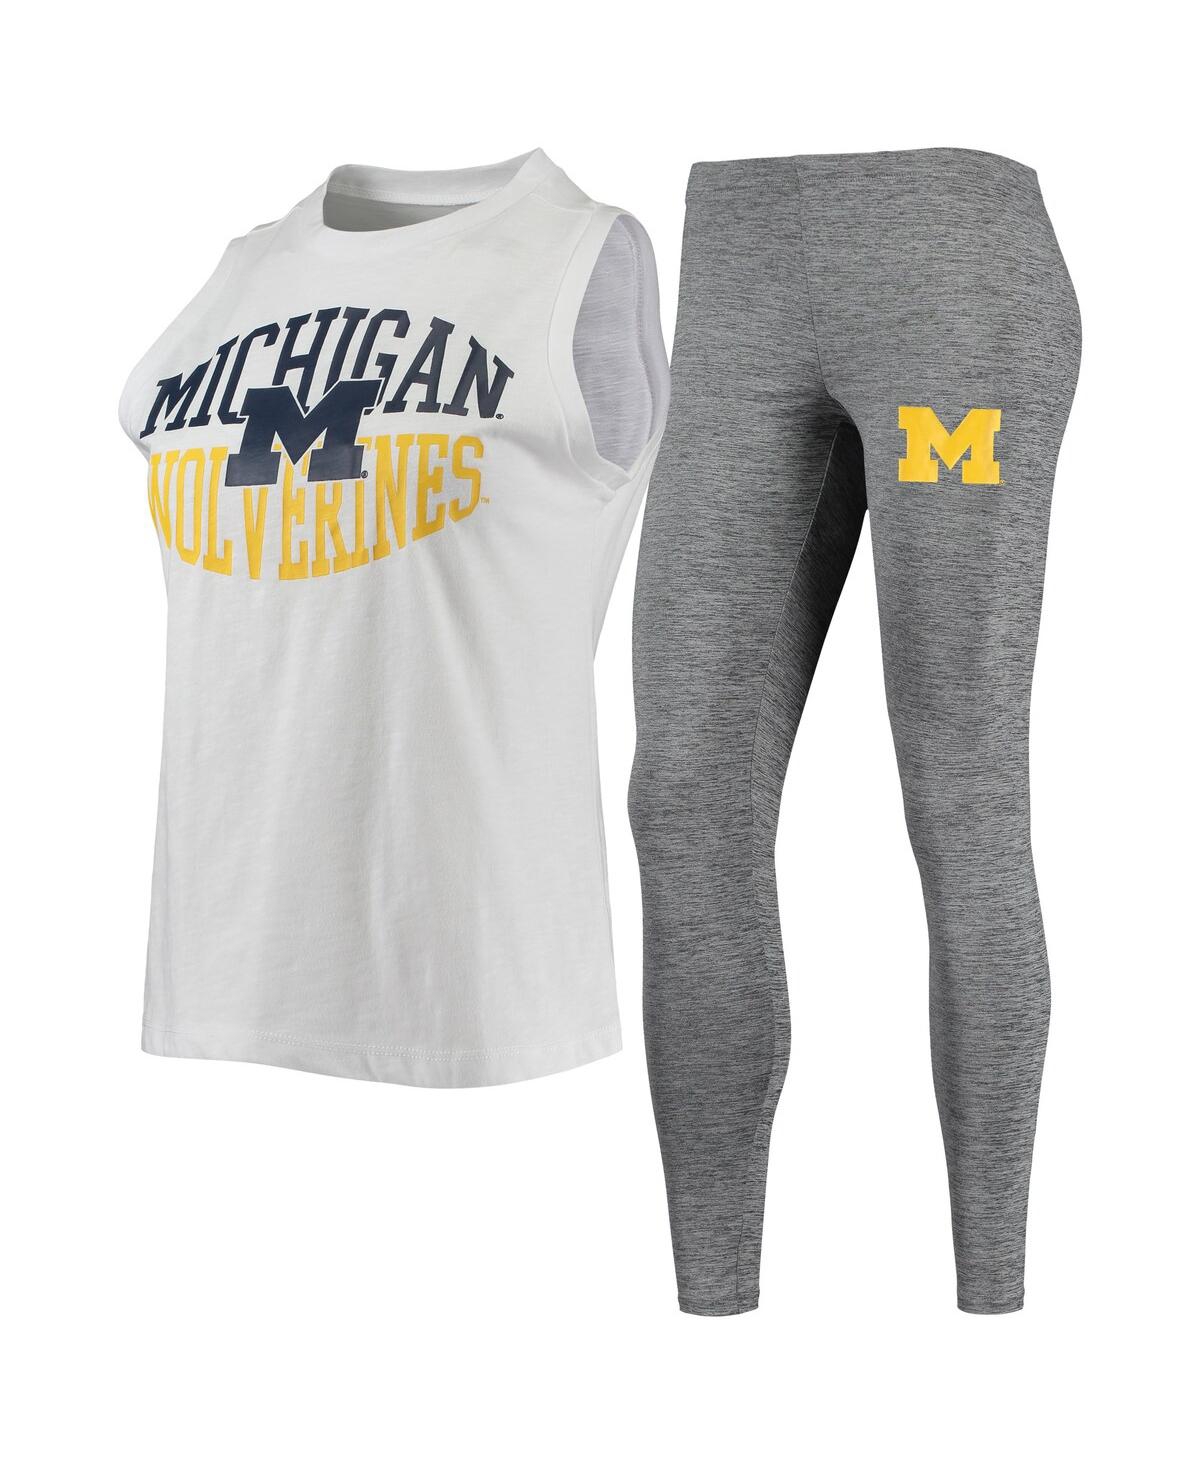 Women's Concepts Sport Charcoal, White Michigan Wolverines Tank Top and Leggings Sleep Set - Charcoal, White